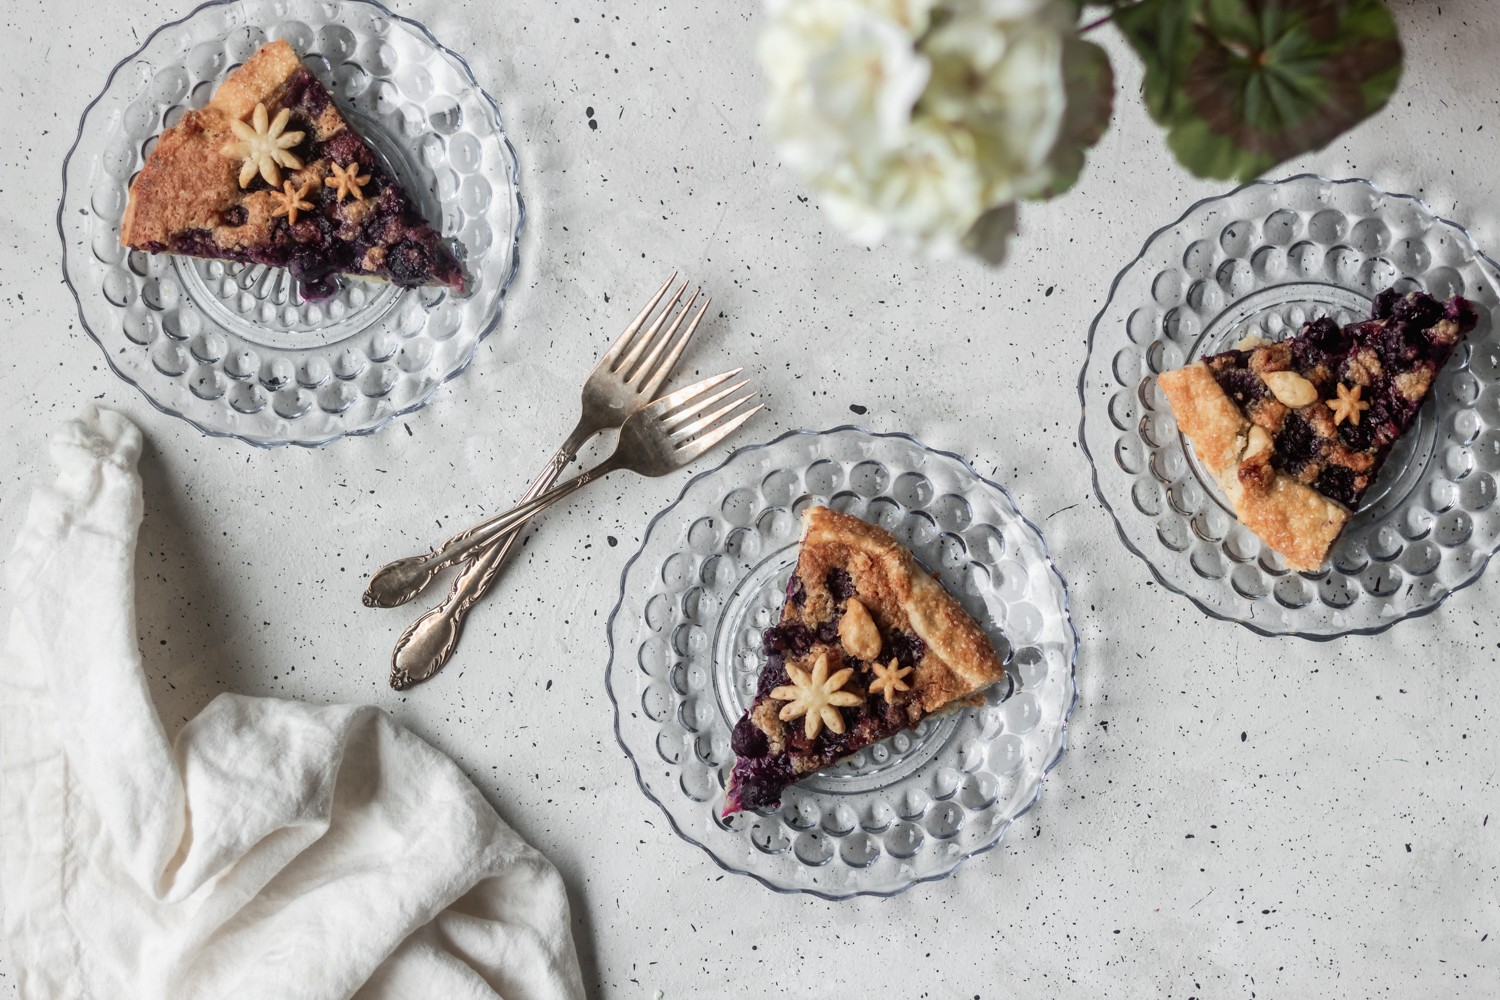 A bird's eye shot of three glass blue plates with slices of berry crostata on top, surrounded by a white linen, forks, and white hydrangeas on a grey table.